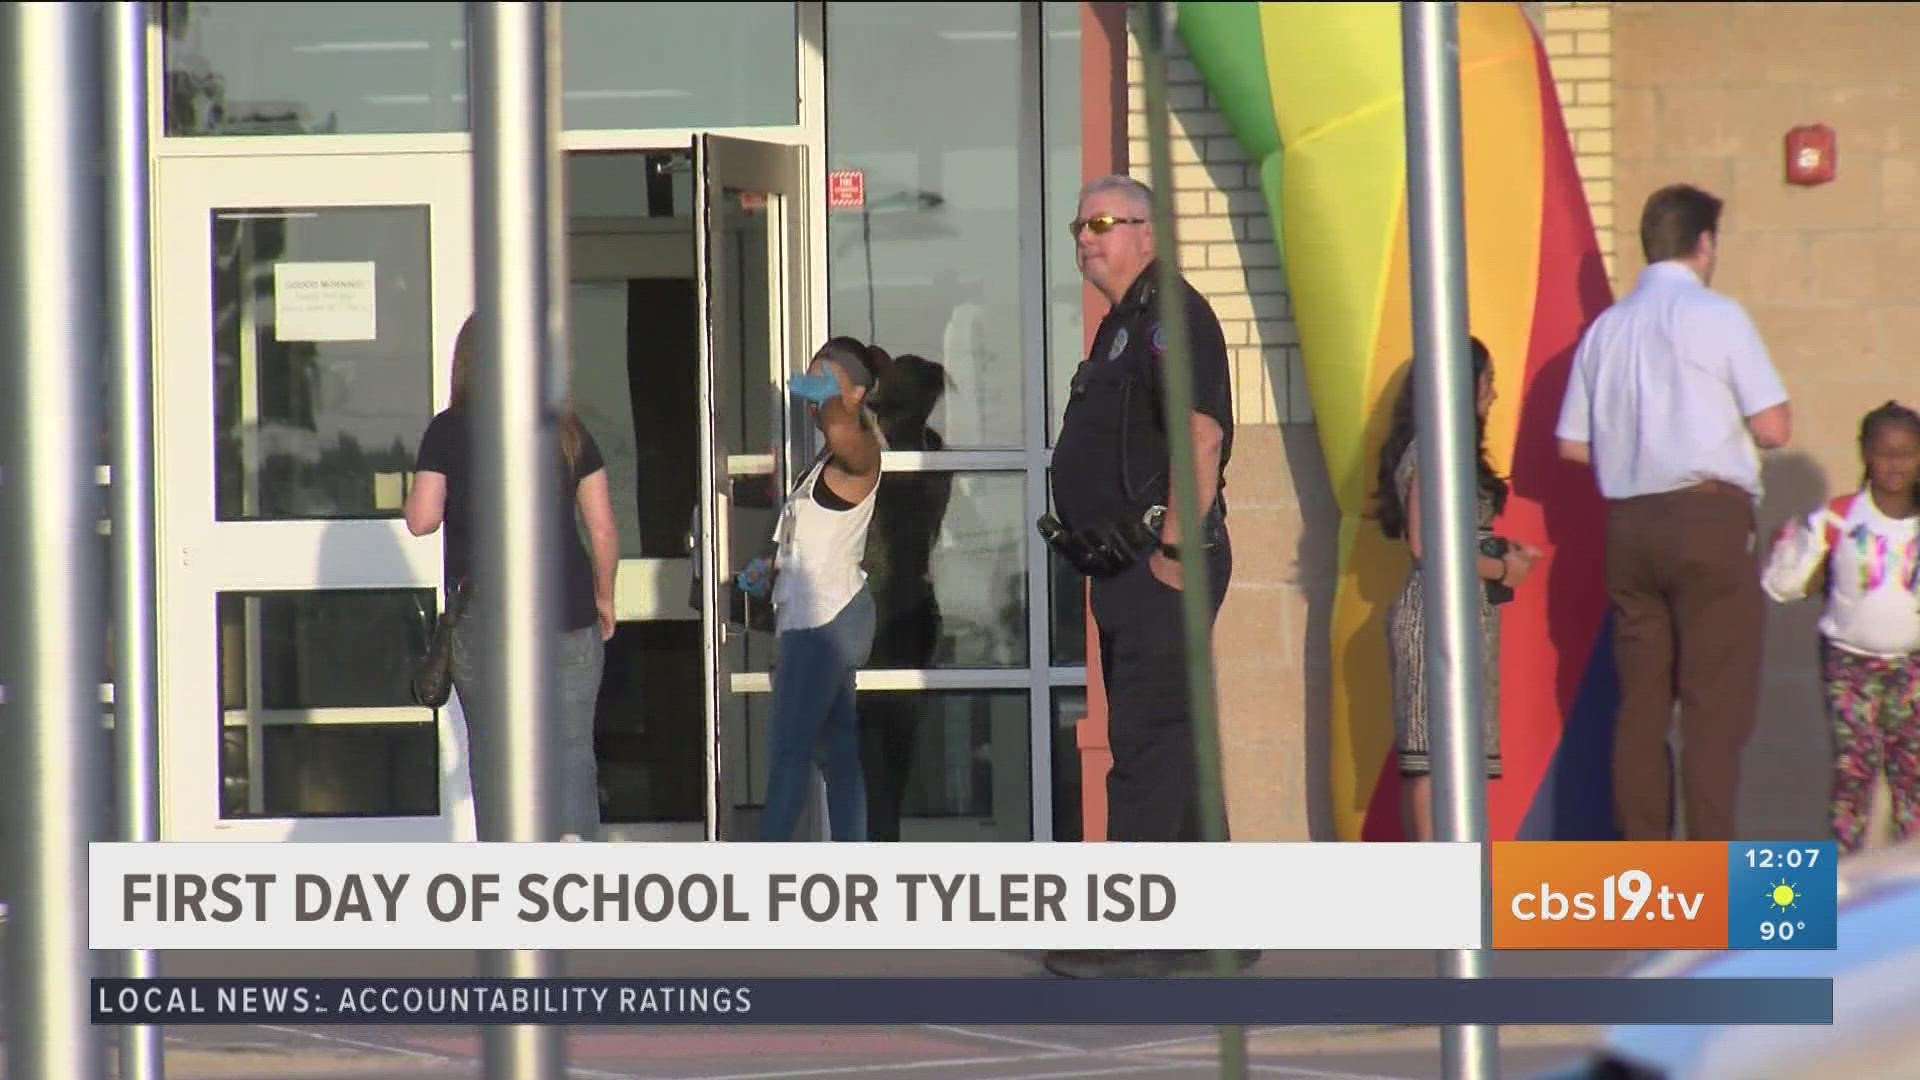 School is in session this week for Tyler ISD and the students are excited to go back to school.